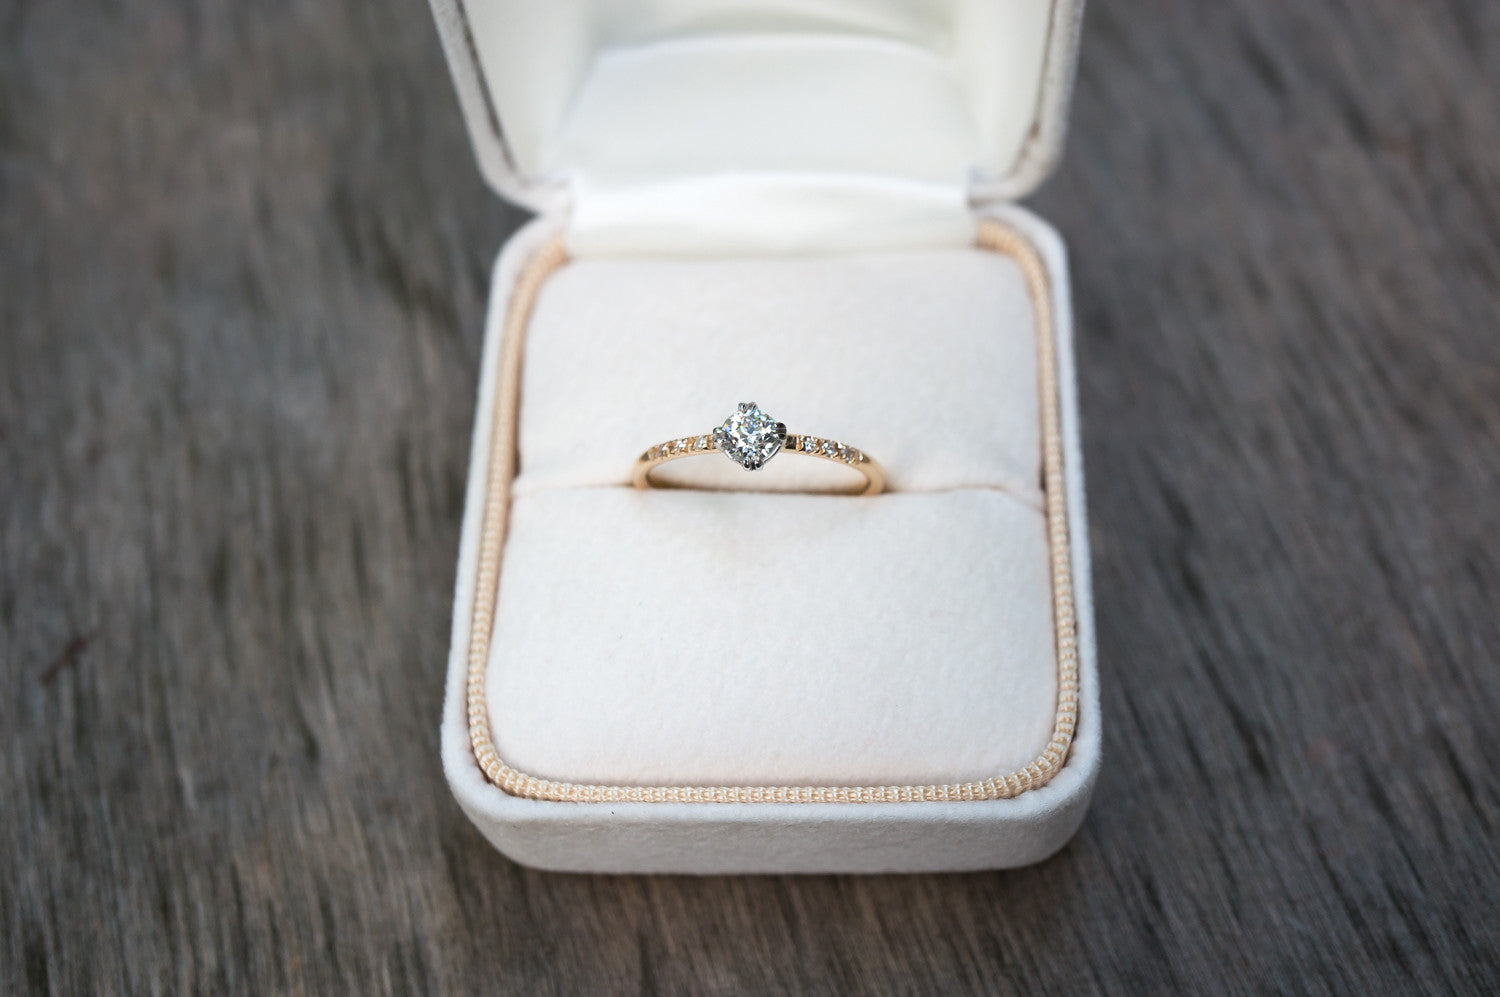 Darling Old Euro Diamond Engagement Ring - S. Kind & Co